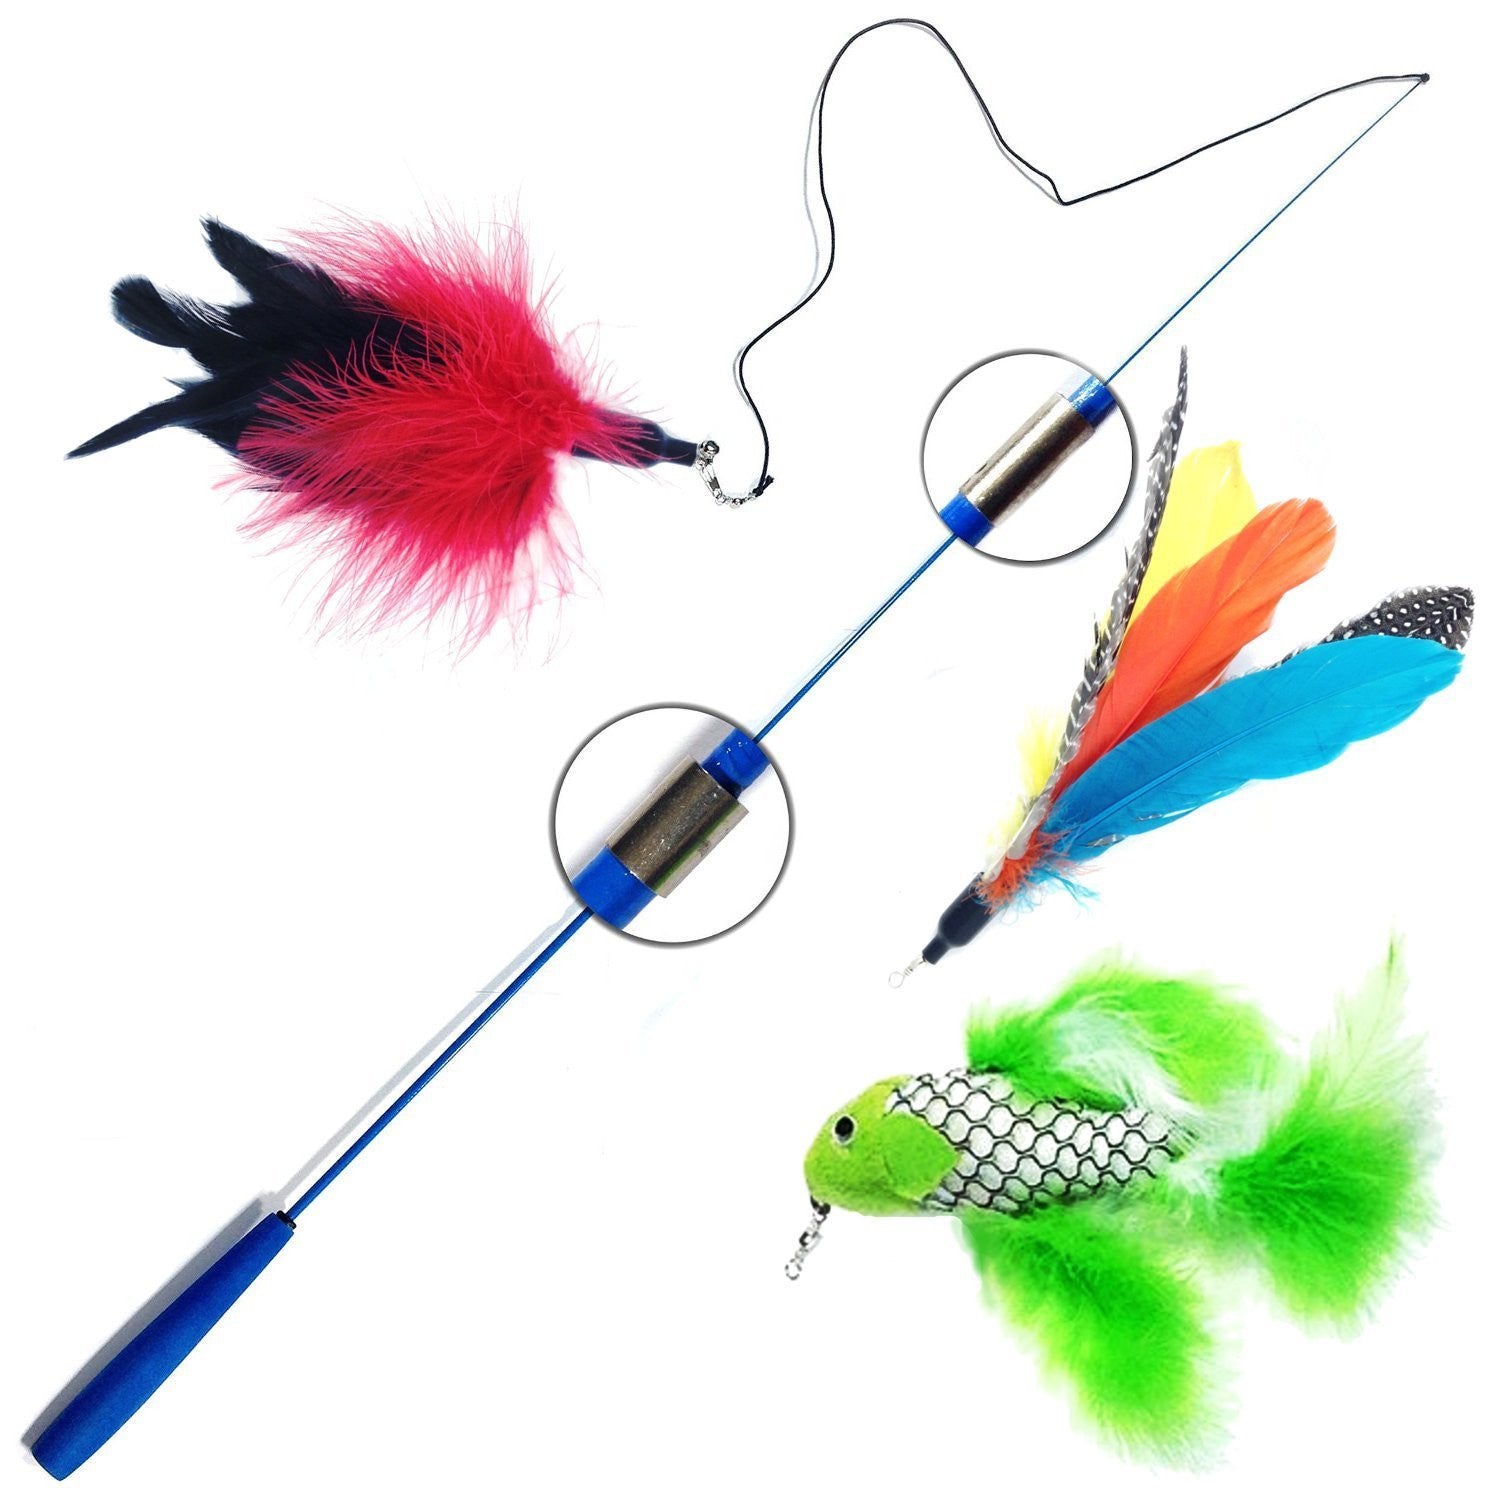 Pet Fit for Life Retractable Interactive Cat or Kitten Wand with 2 Feathers and 1 Soft Furry Combo